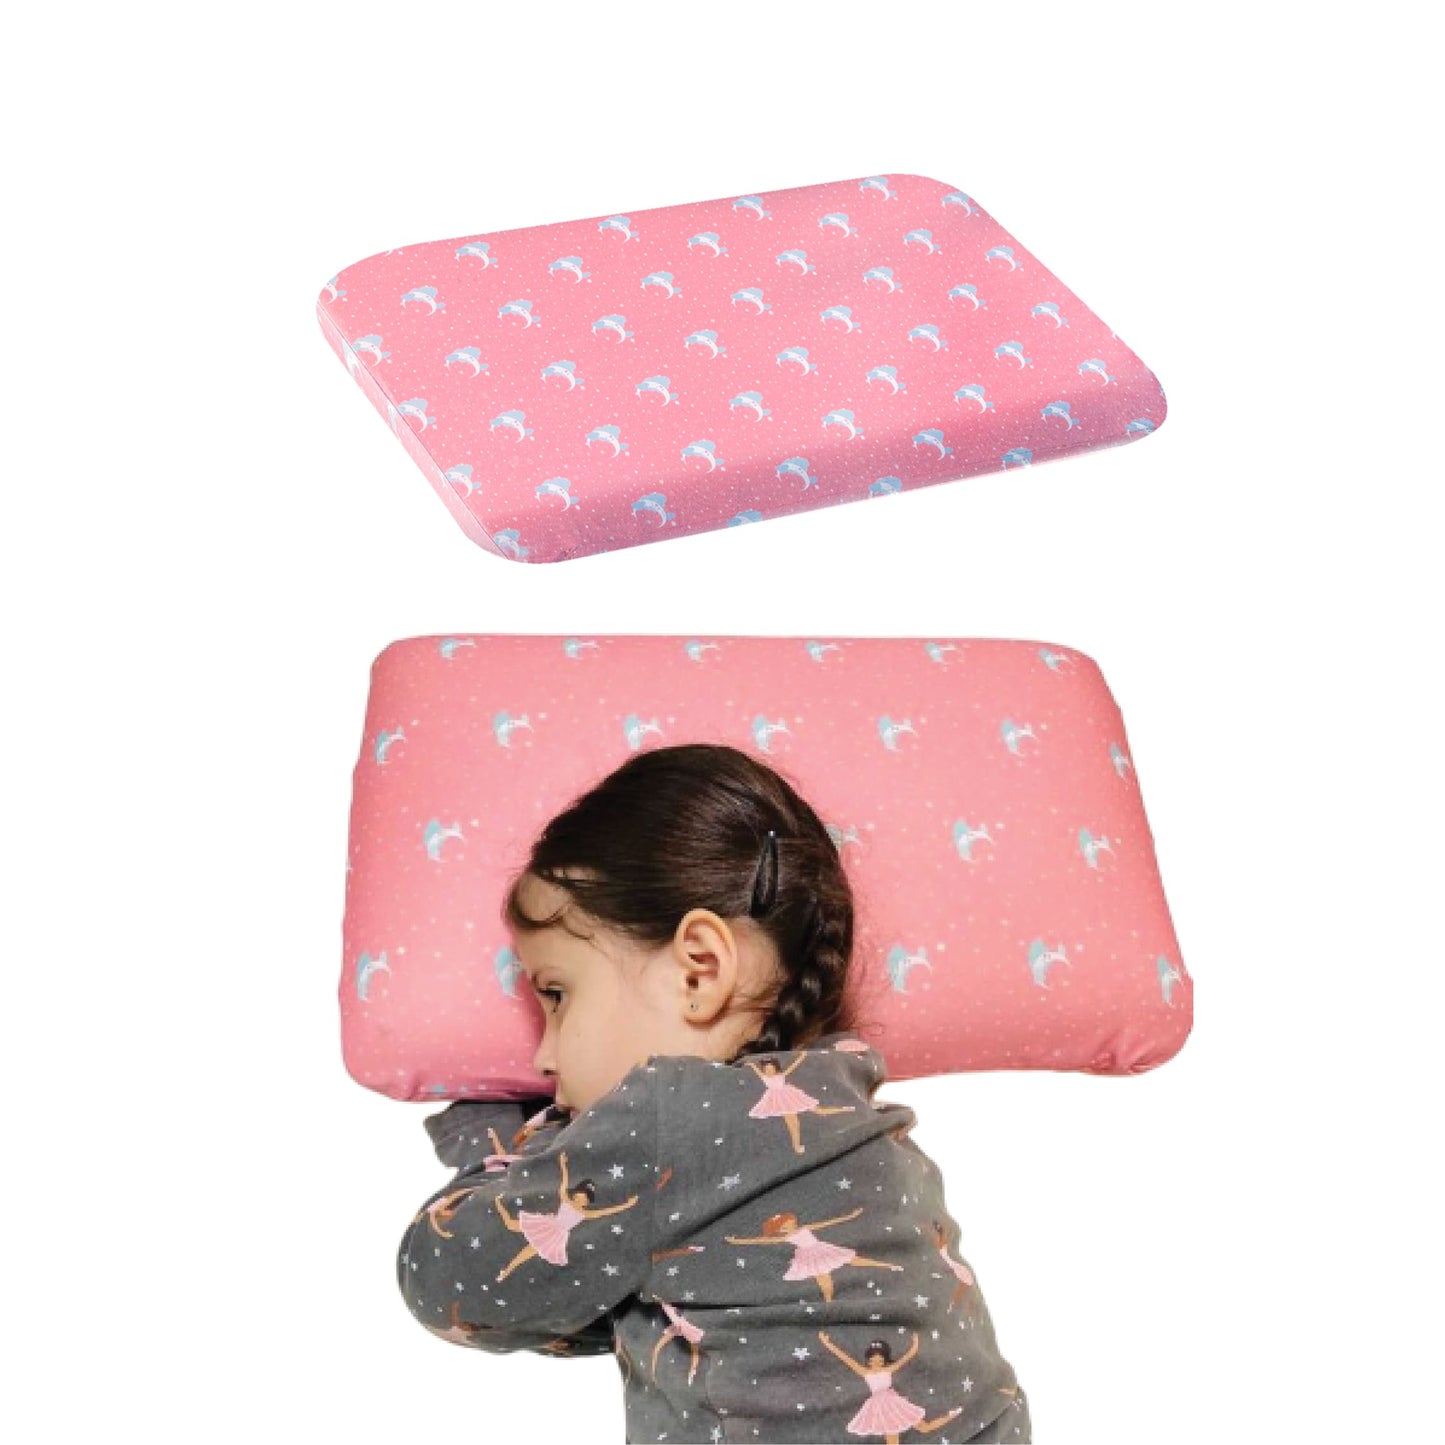 Little Dreamers ThickSnooze Pillow